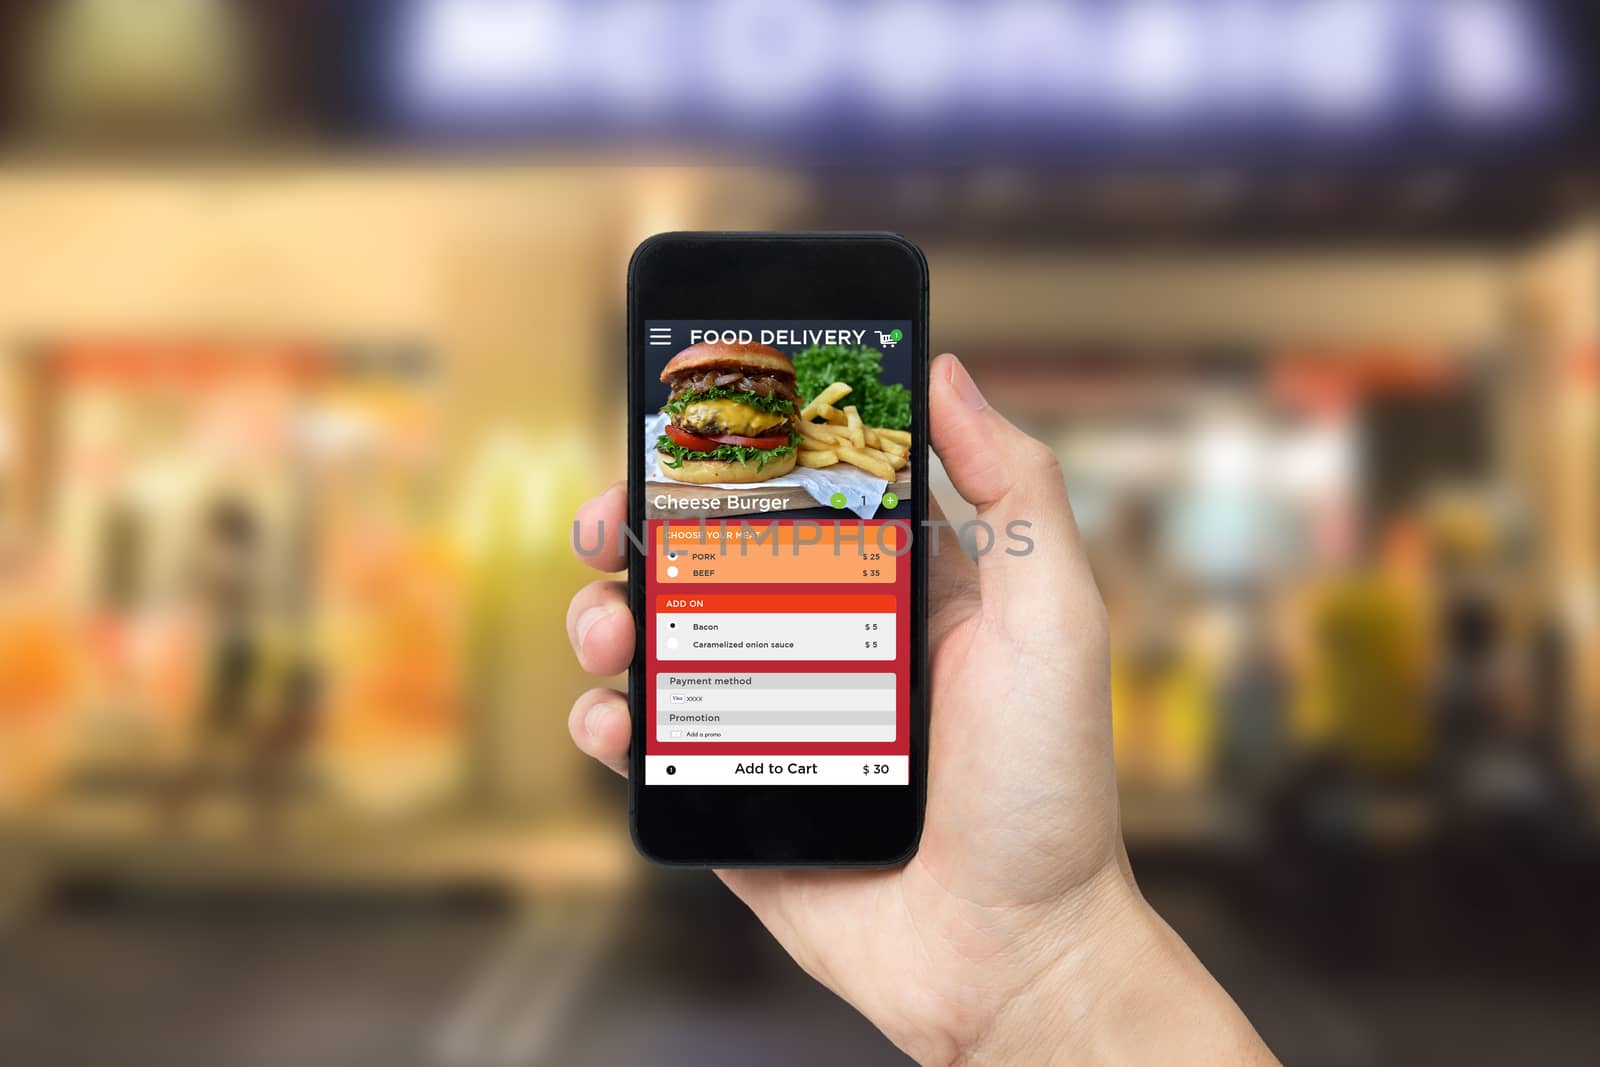 Hand holding smart phone with app food delivery order screen. application for restaurant service.